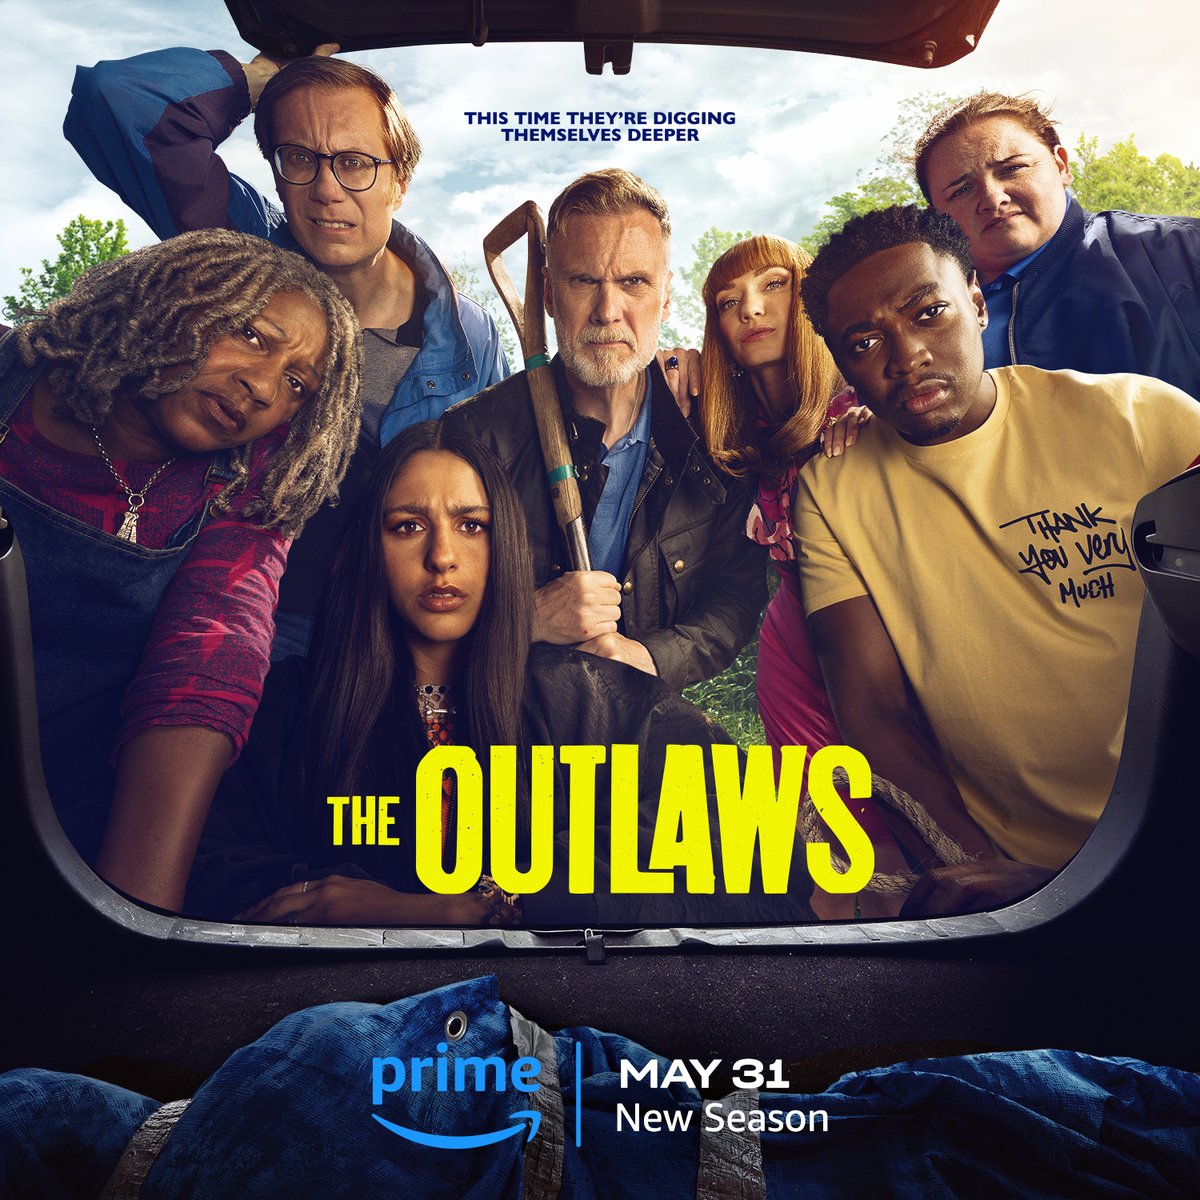 They’re not bad people, they just did a bad thing…again. #TheOutlaws S3 arrives May 31 on @PrimeVideo and May 30 on @BBCiPlayer in the UK.